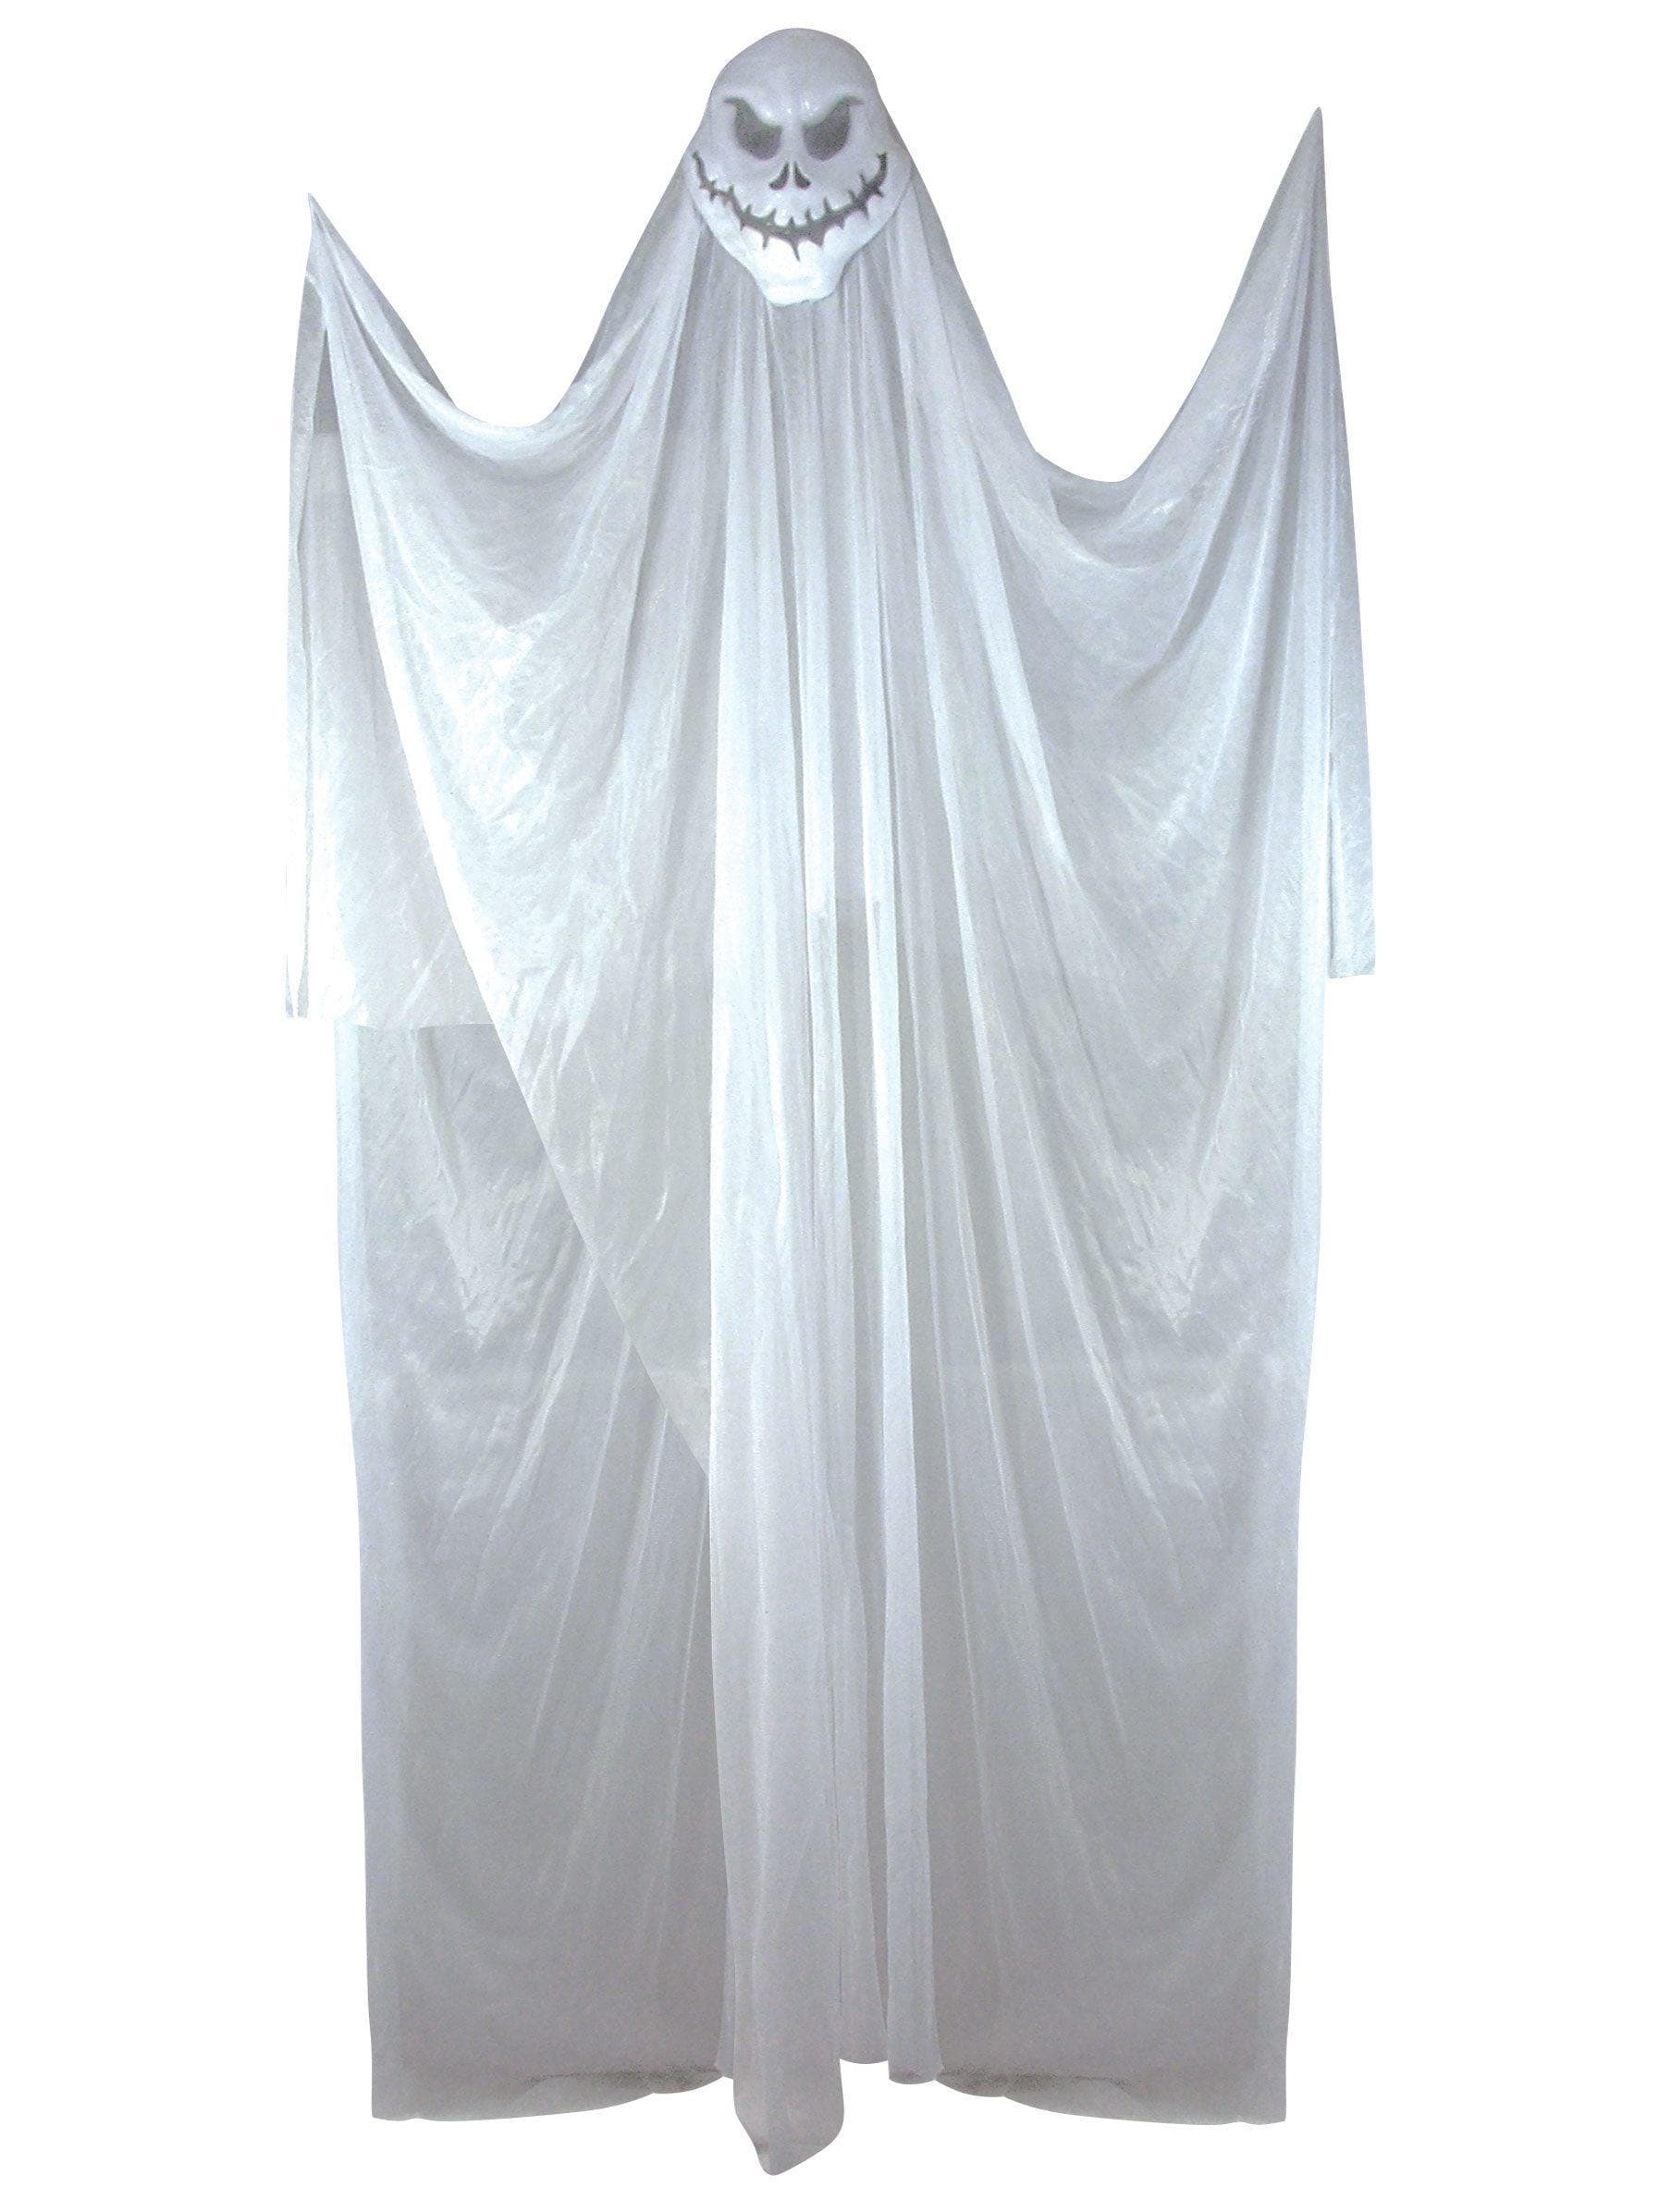 Spooky Hanging 7 Foot Ghost - costumes.com